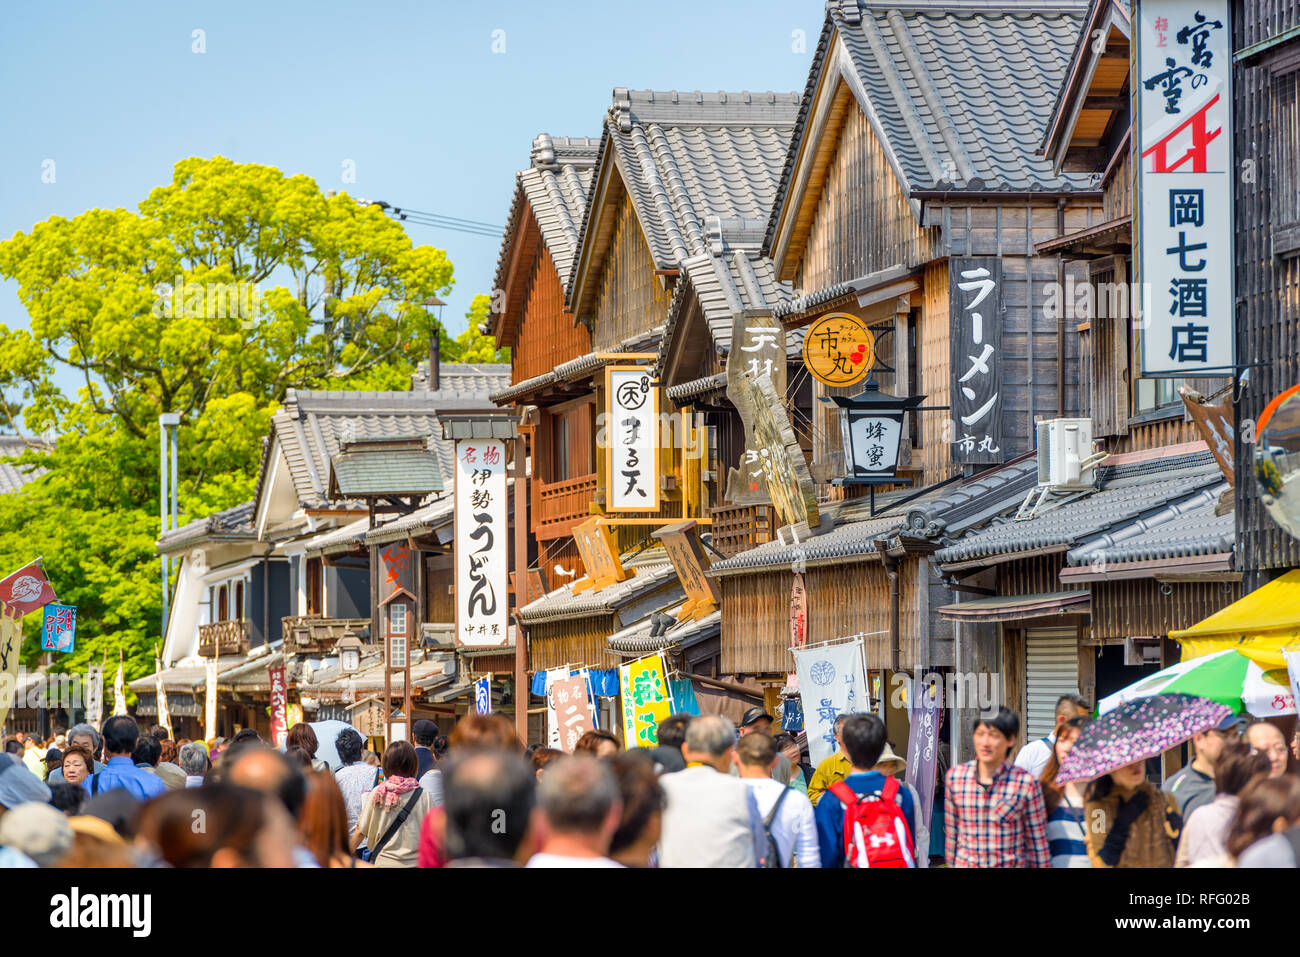 ISE, JAPAN - APRIL 25, 2014: Crowds walk on the historic shopping street of Oharai-machi. The reconstructed buildings are completed in the Edo period  Stock Photo